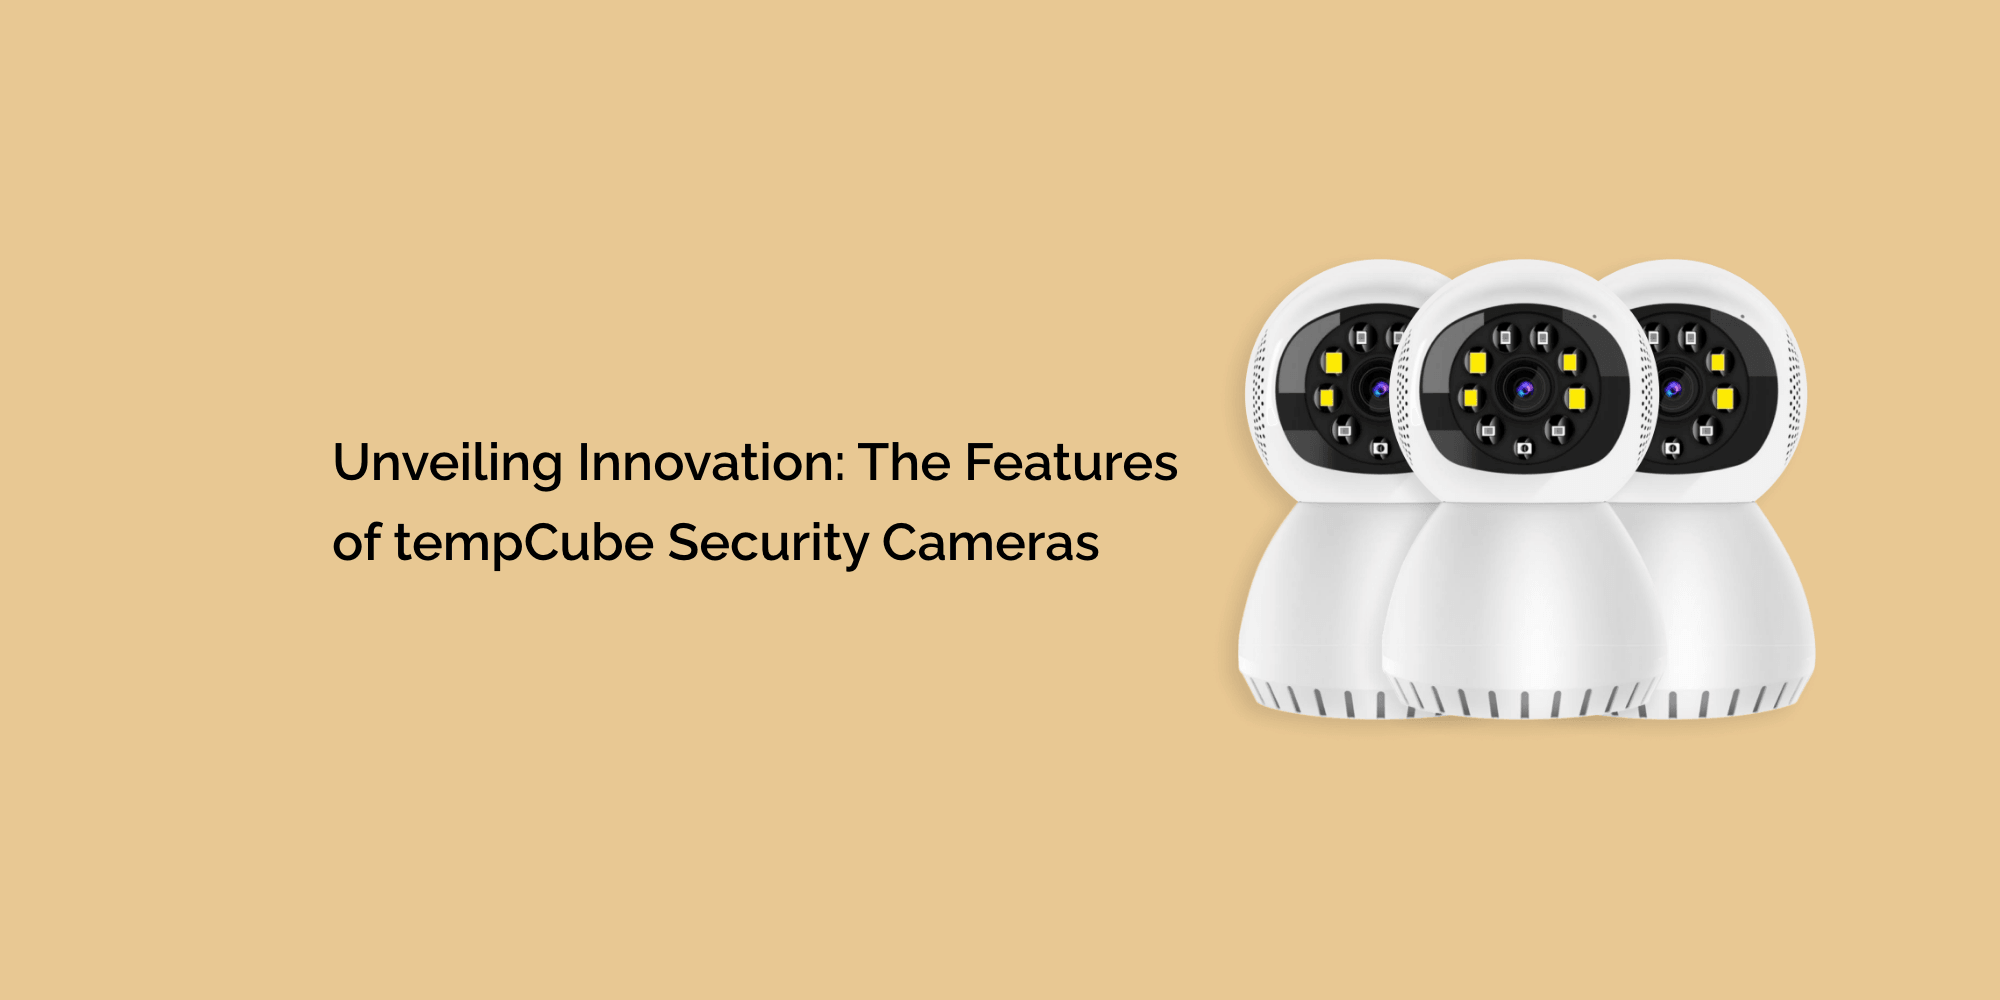 Unveiling Innovation: The Features of tempCube Security Cameras